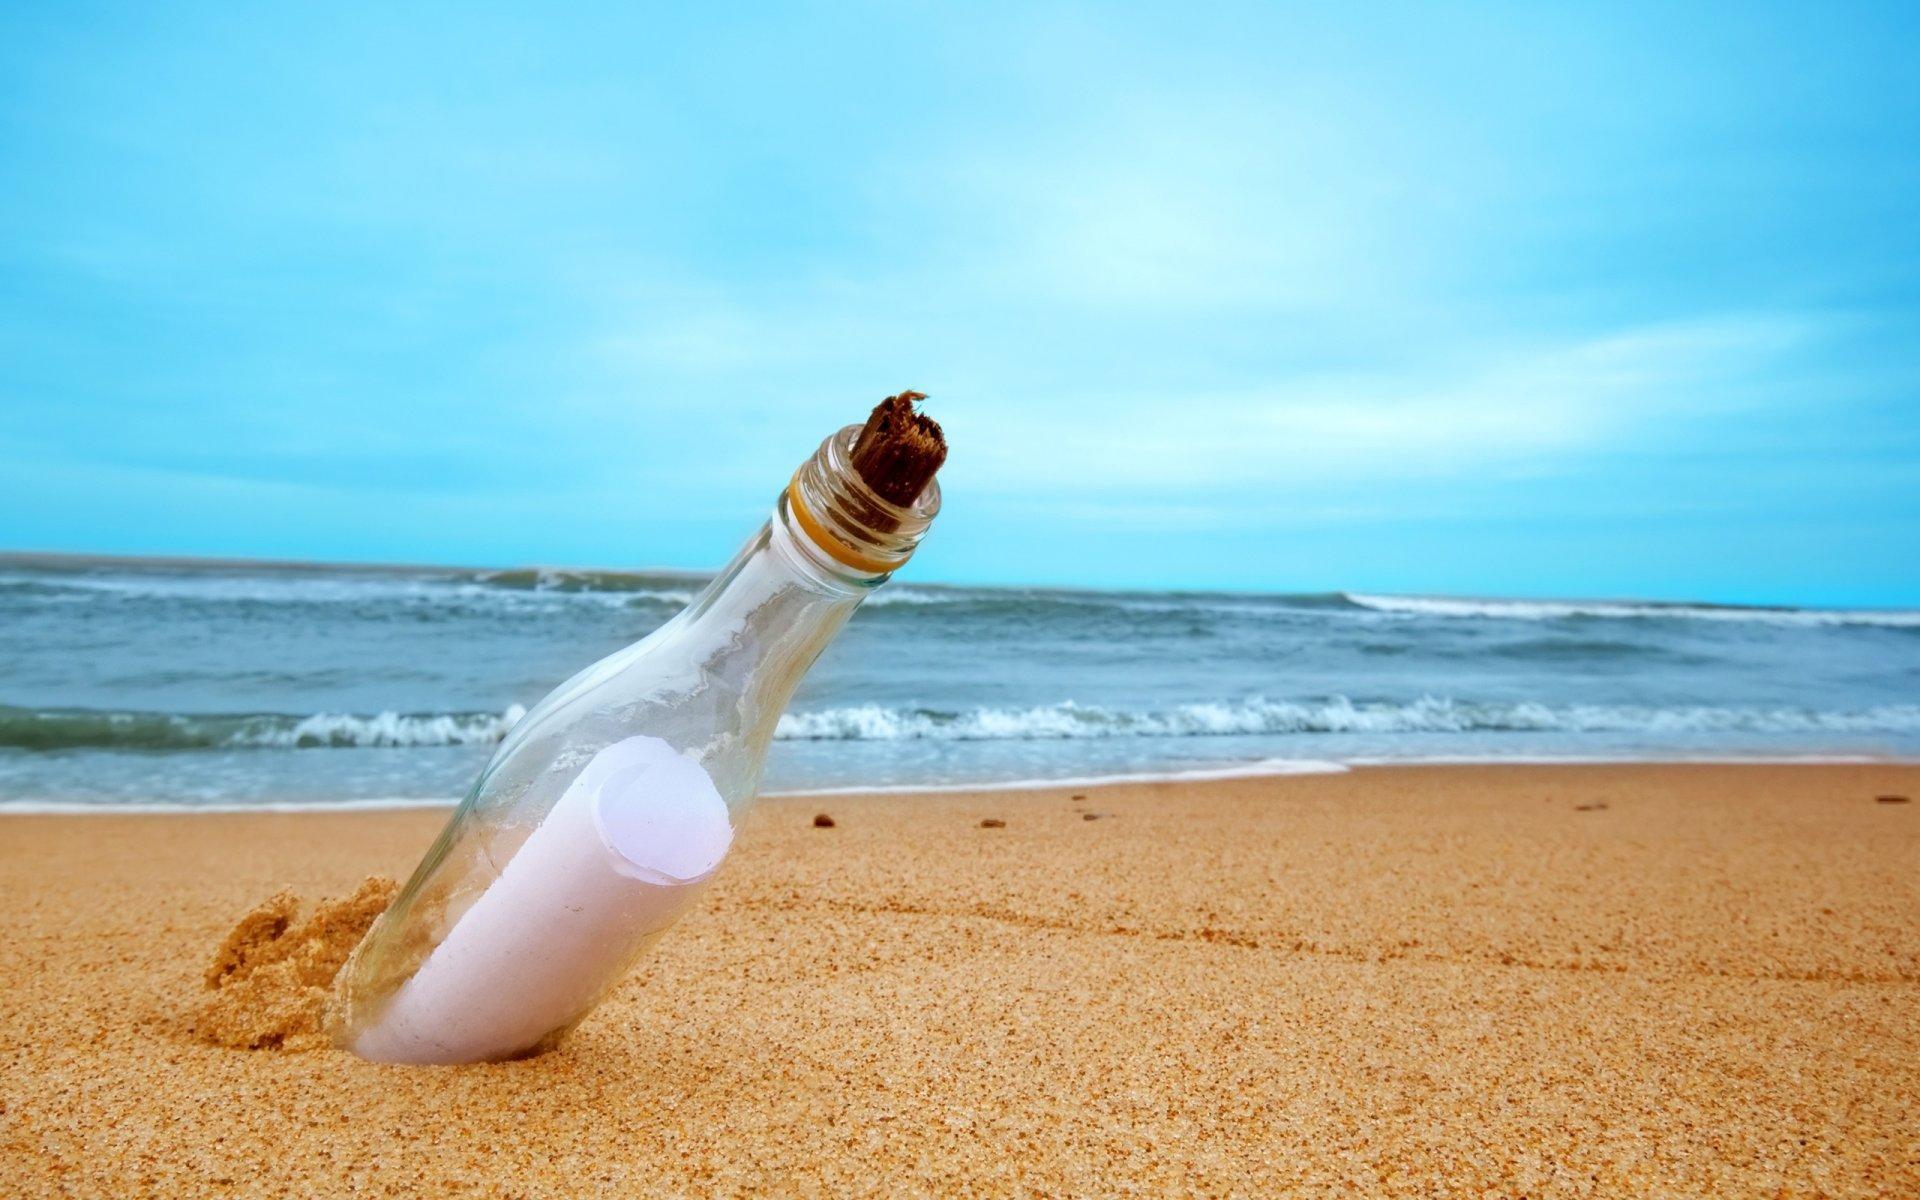 mood a bottle a letter note message beach sand sea river water